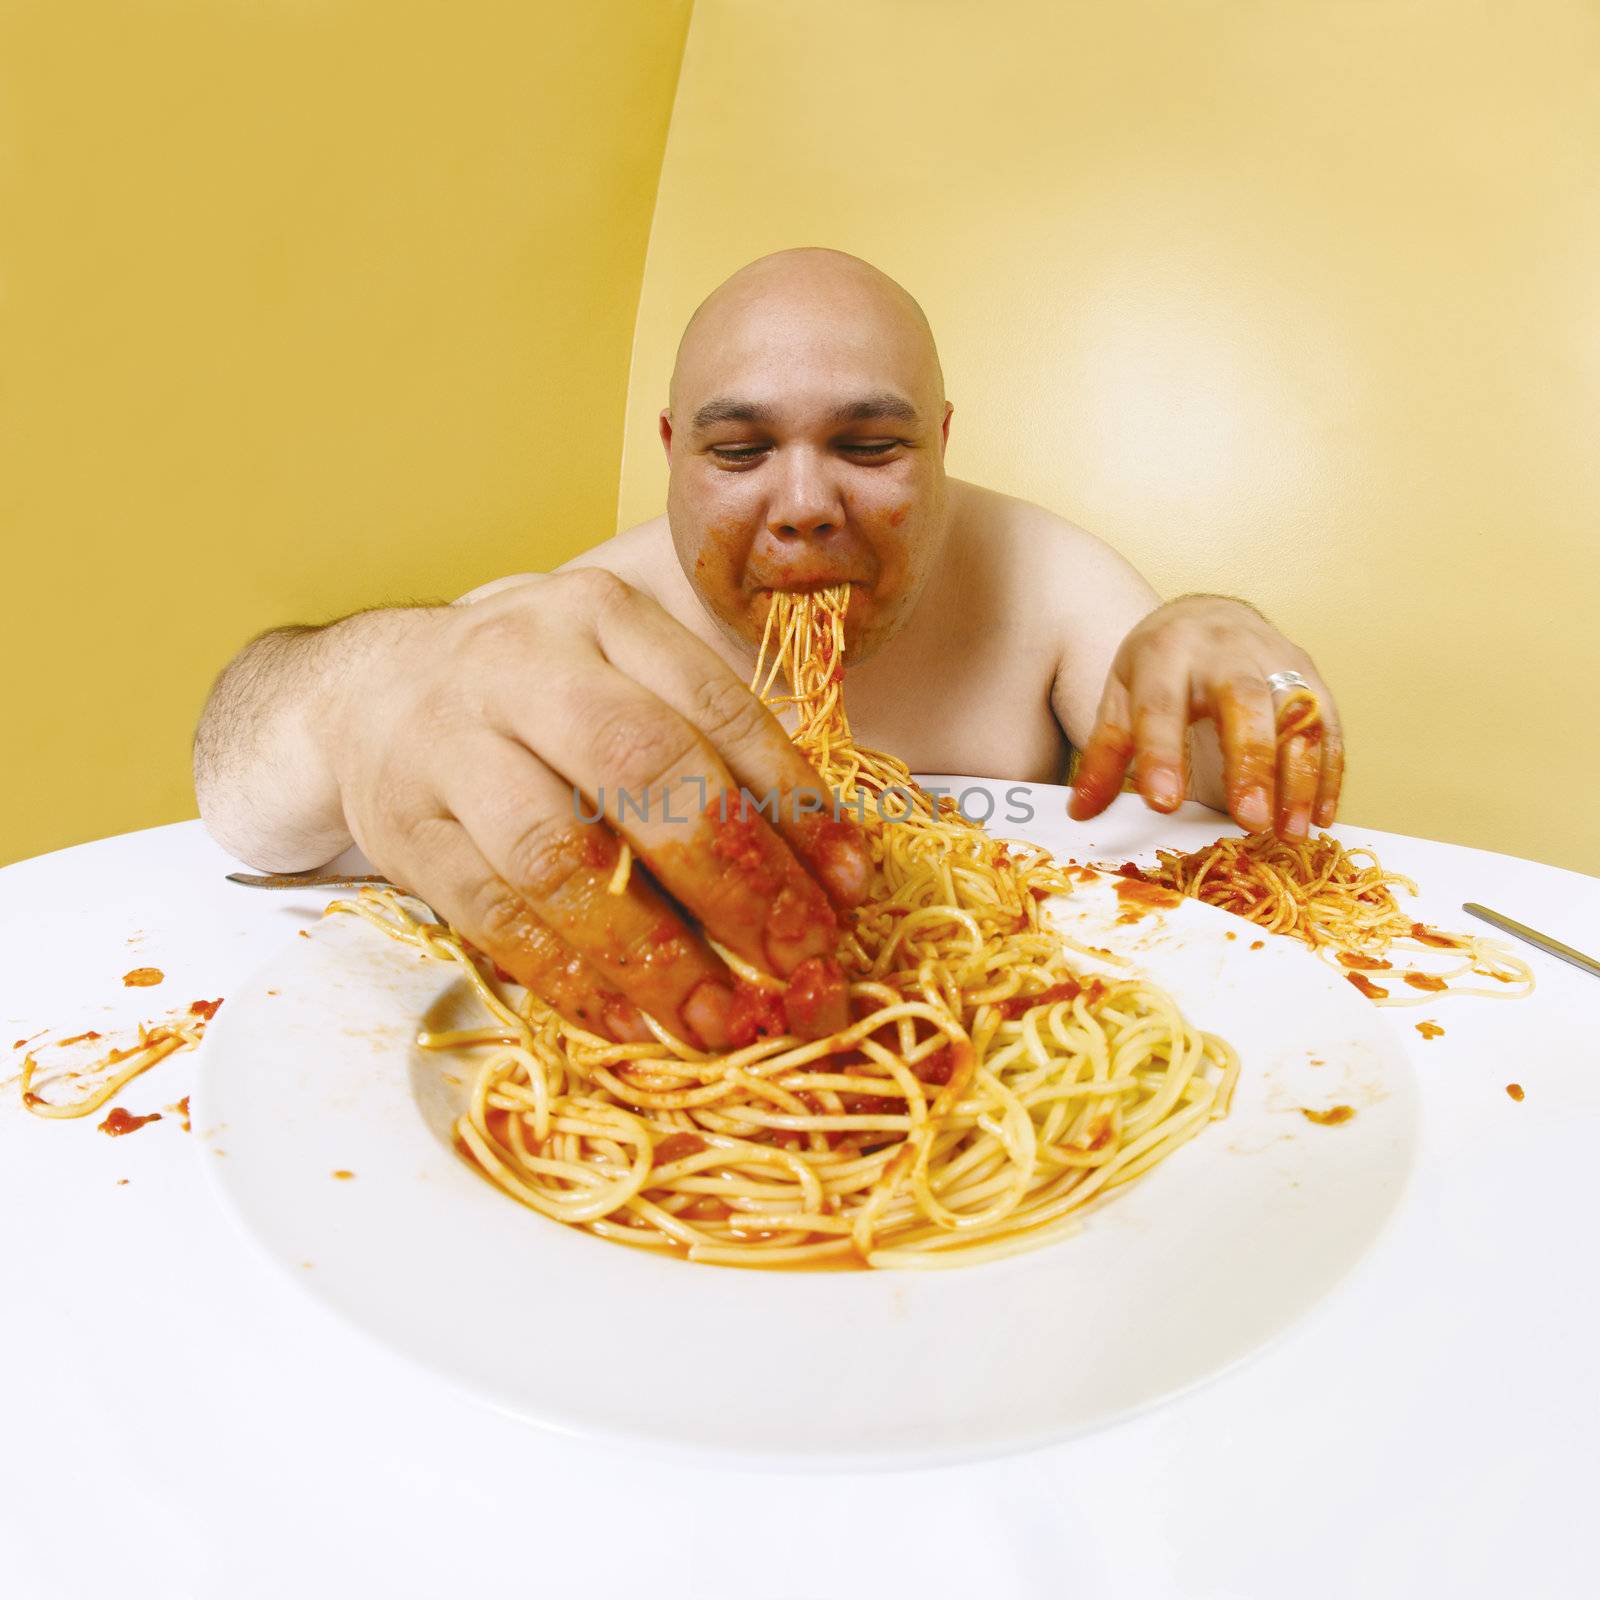 An overweight man enjoying a plate of spaghetti.  Shot with fish-eye lens.  Focus is on the face.
